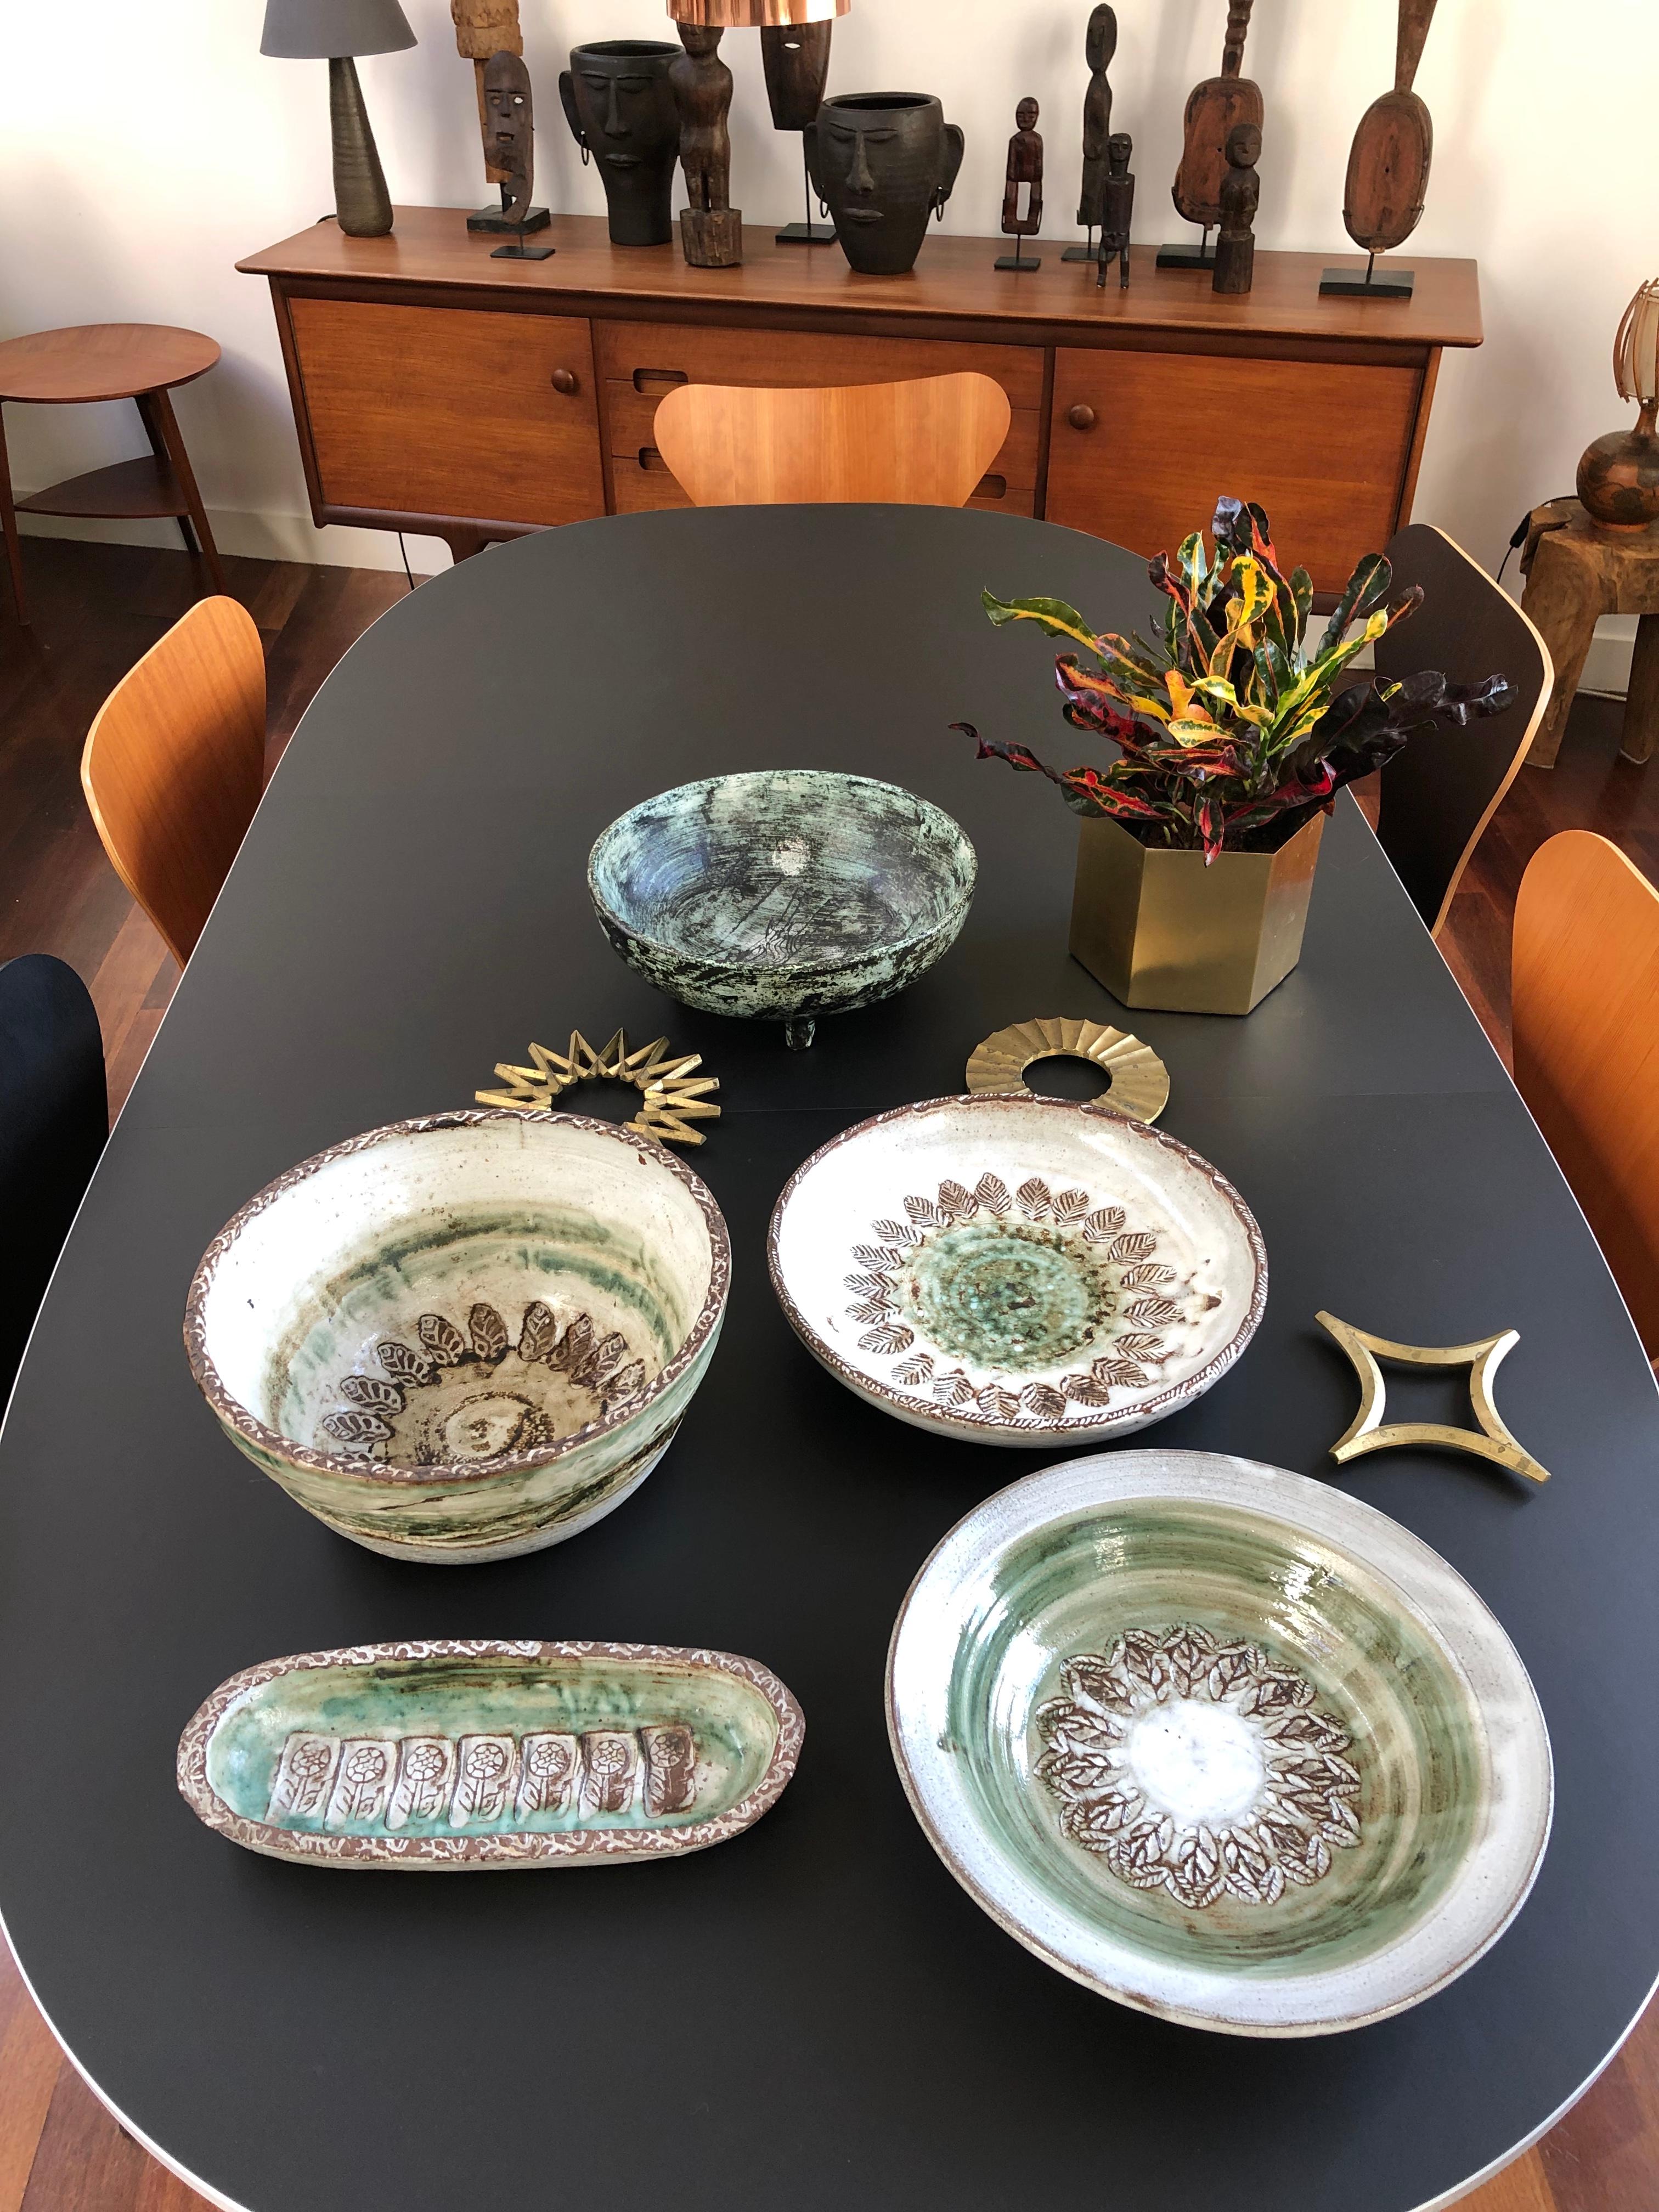 Midcentury decorative ceramic bowl (circa 1960s) by Albert Thiry (1932-2009). A sensuous light-green glazed inner surface with ornamental leaf motif in the central base of the inner bowl. The lip and outer surface are finished in a light white glaze